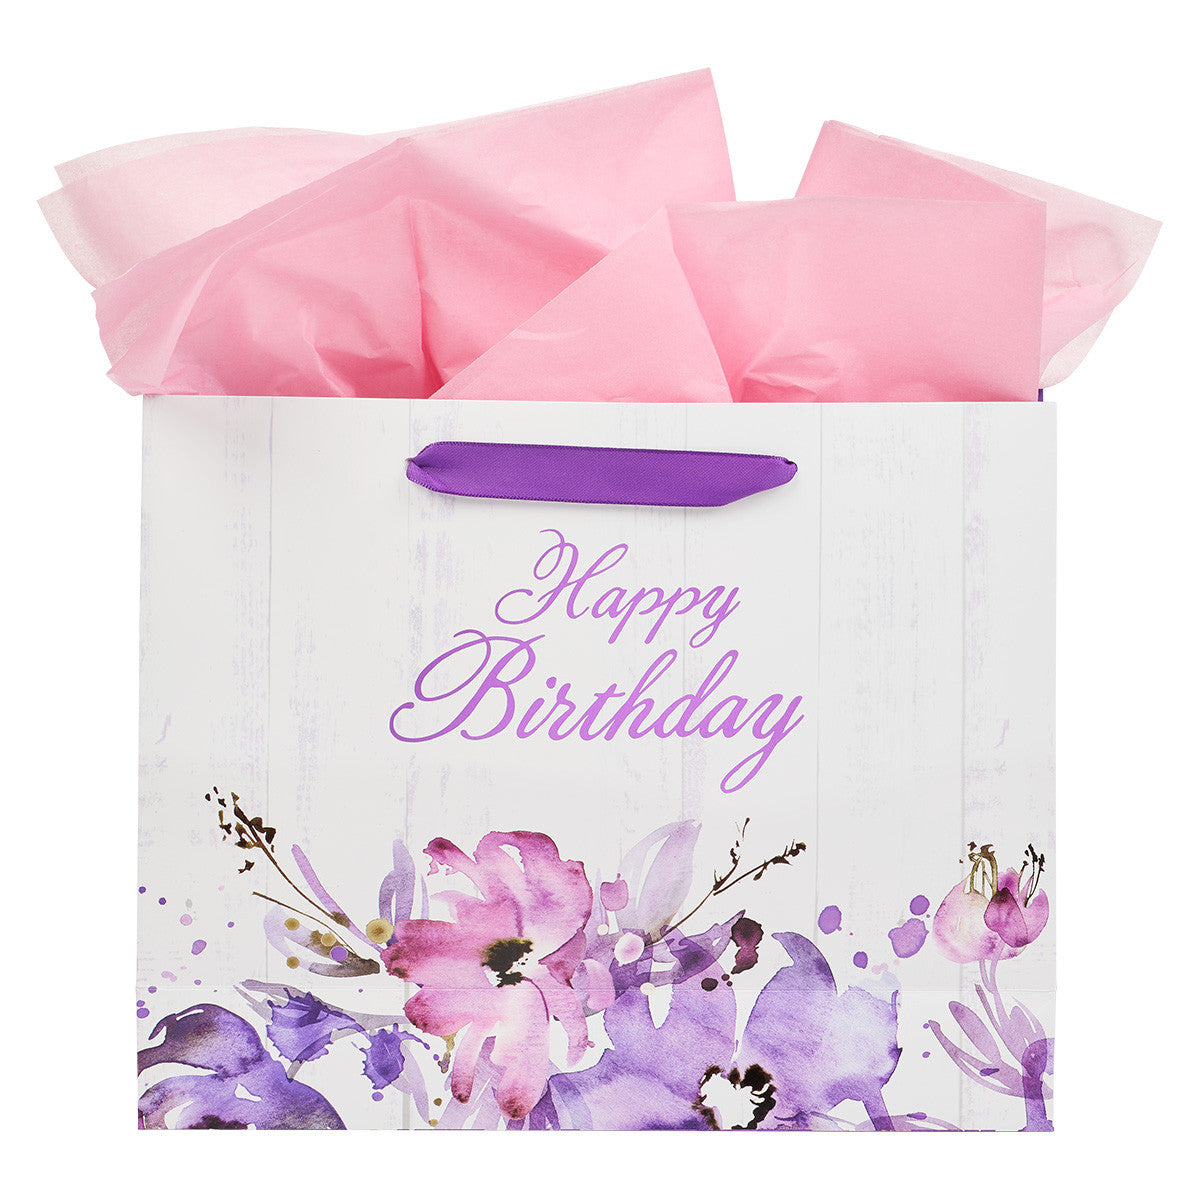 Happy Birthday Purple Floral Large Landscape Gift Bag and Card Set - The Christian Gift Company